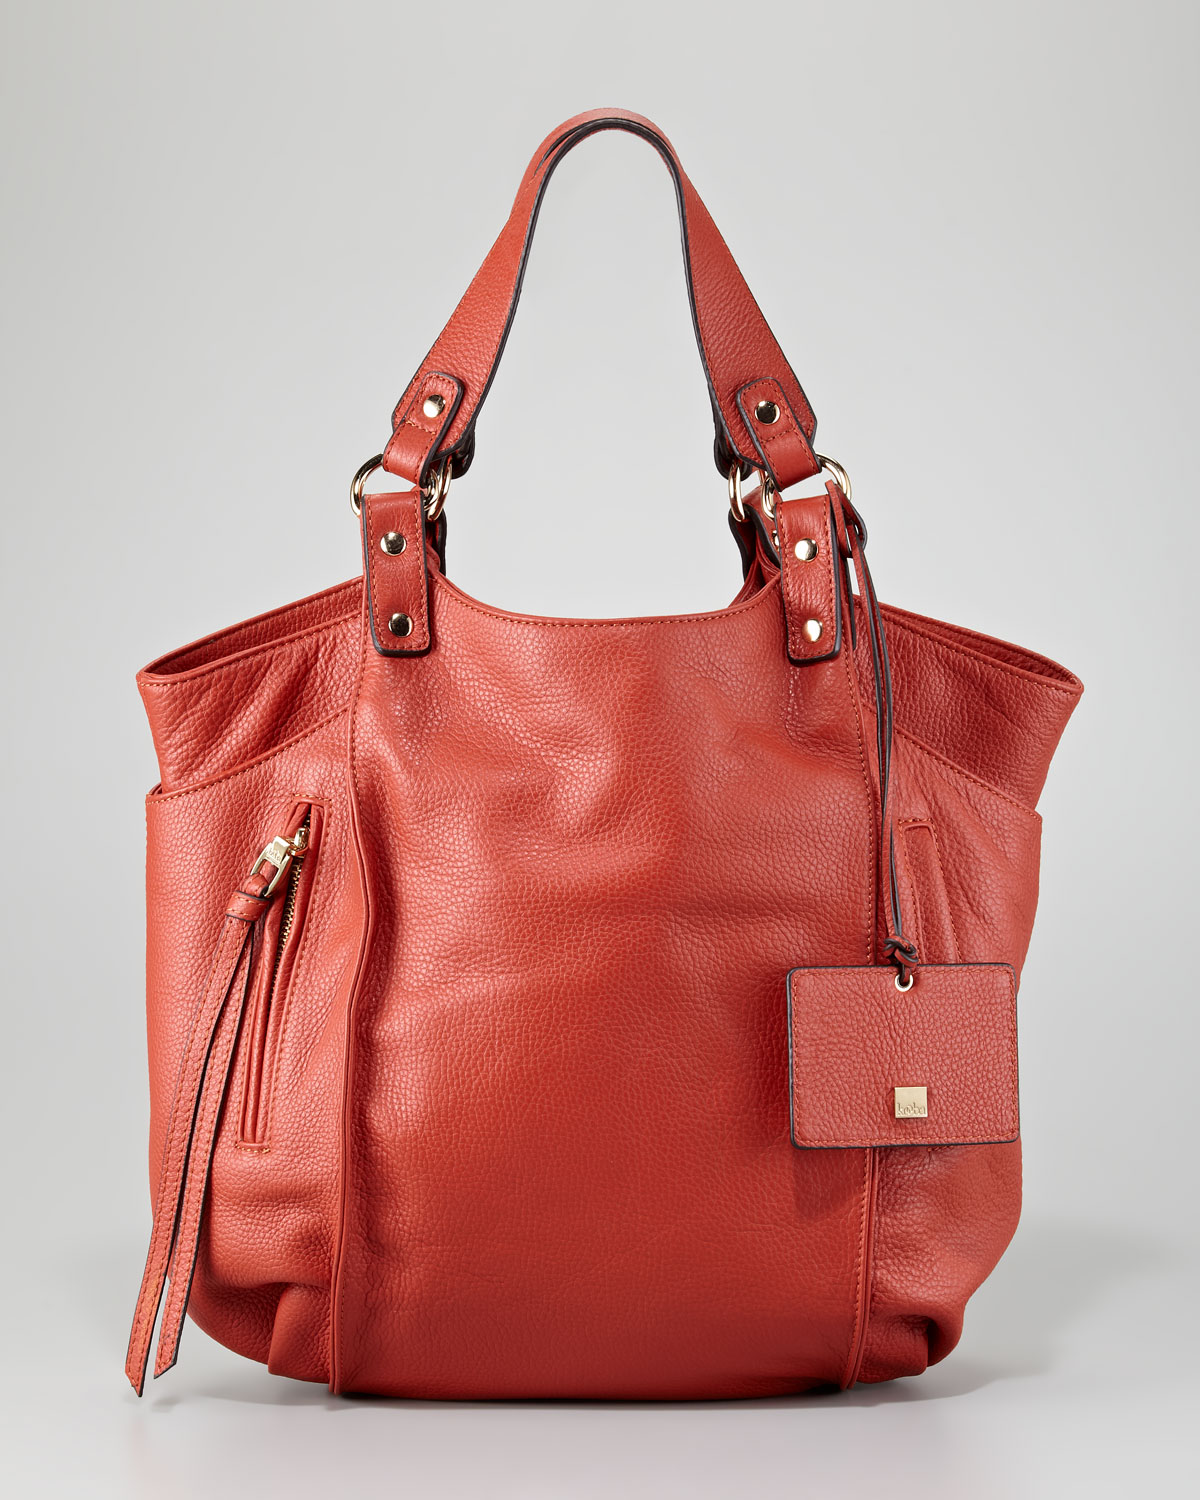 Kooba Logan Leather Tote Bag in Red (coral) | Lyst